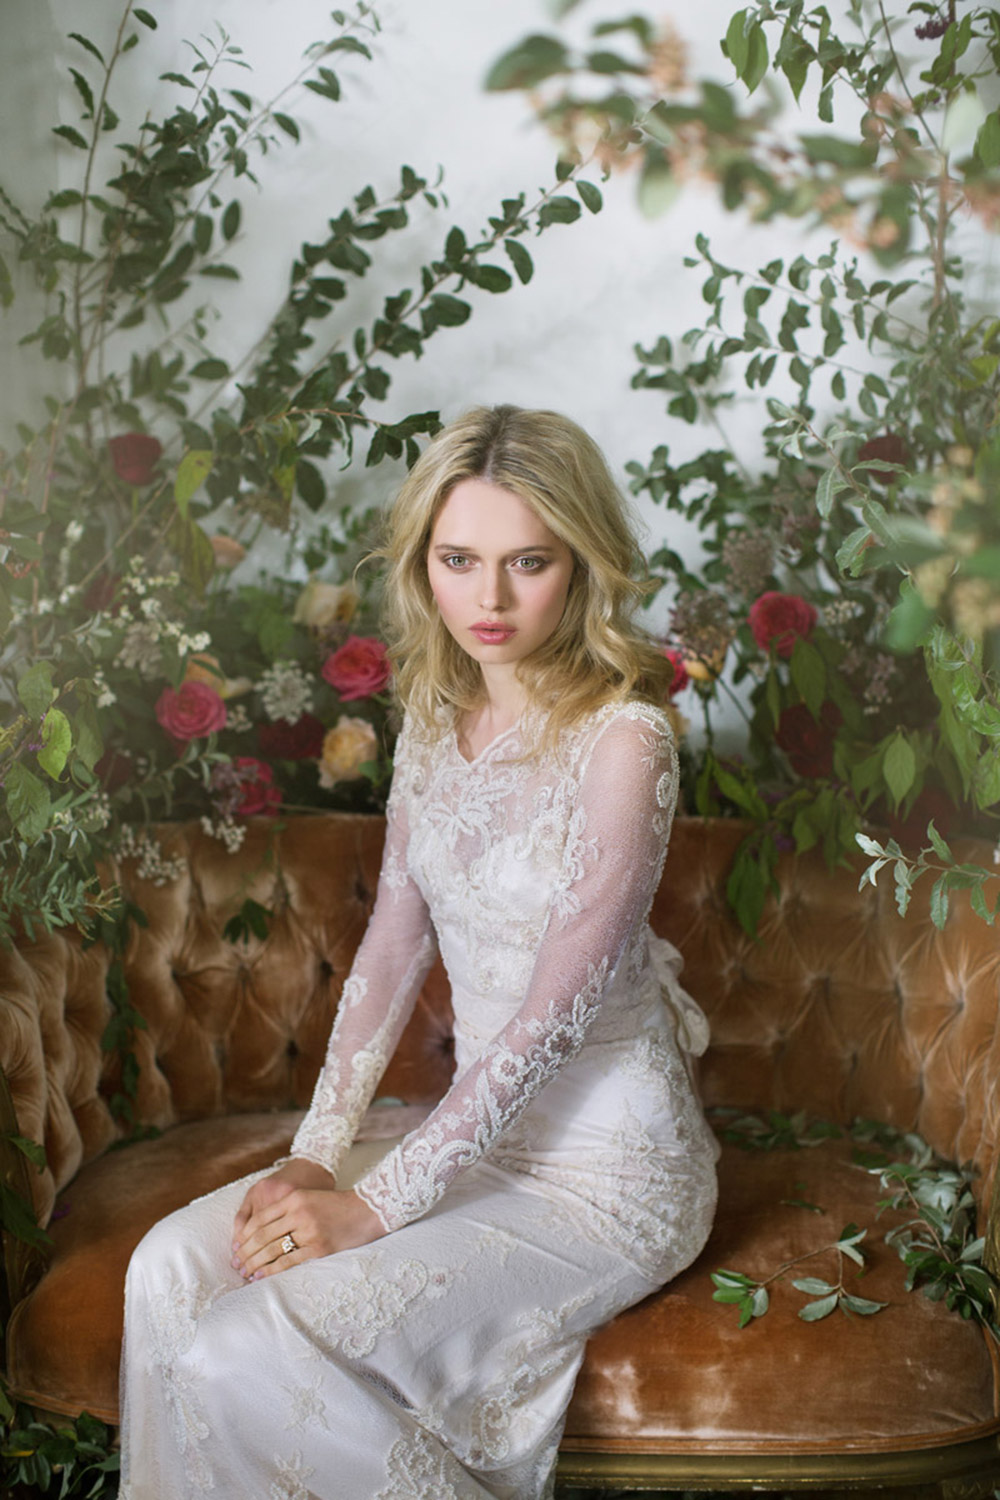 Pearle - Claire Pettibone Fall 2016 Bridal Collection. www.theweddingnotebook.com